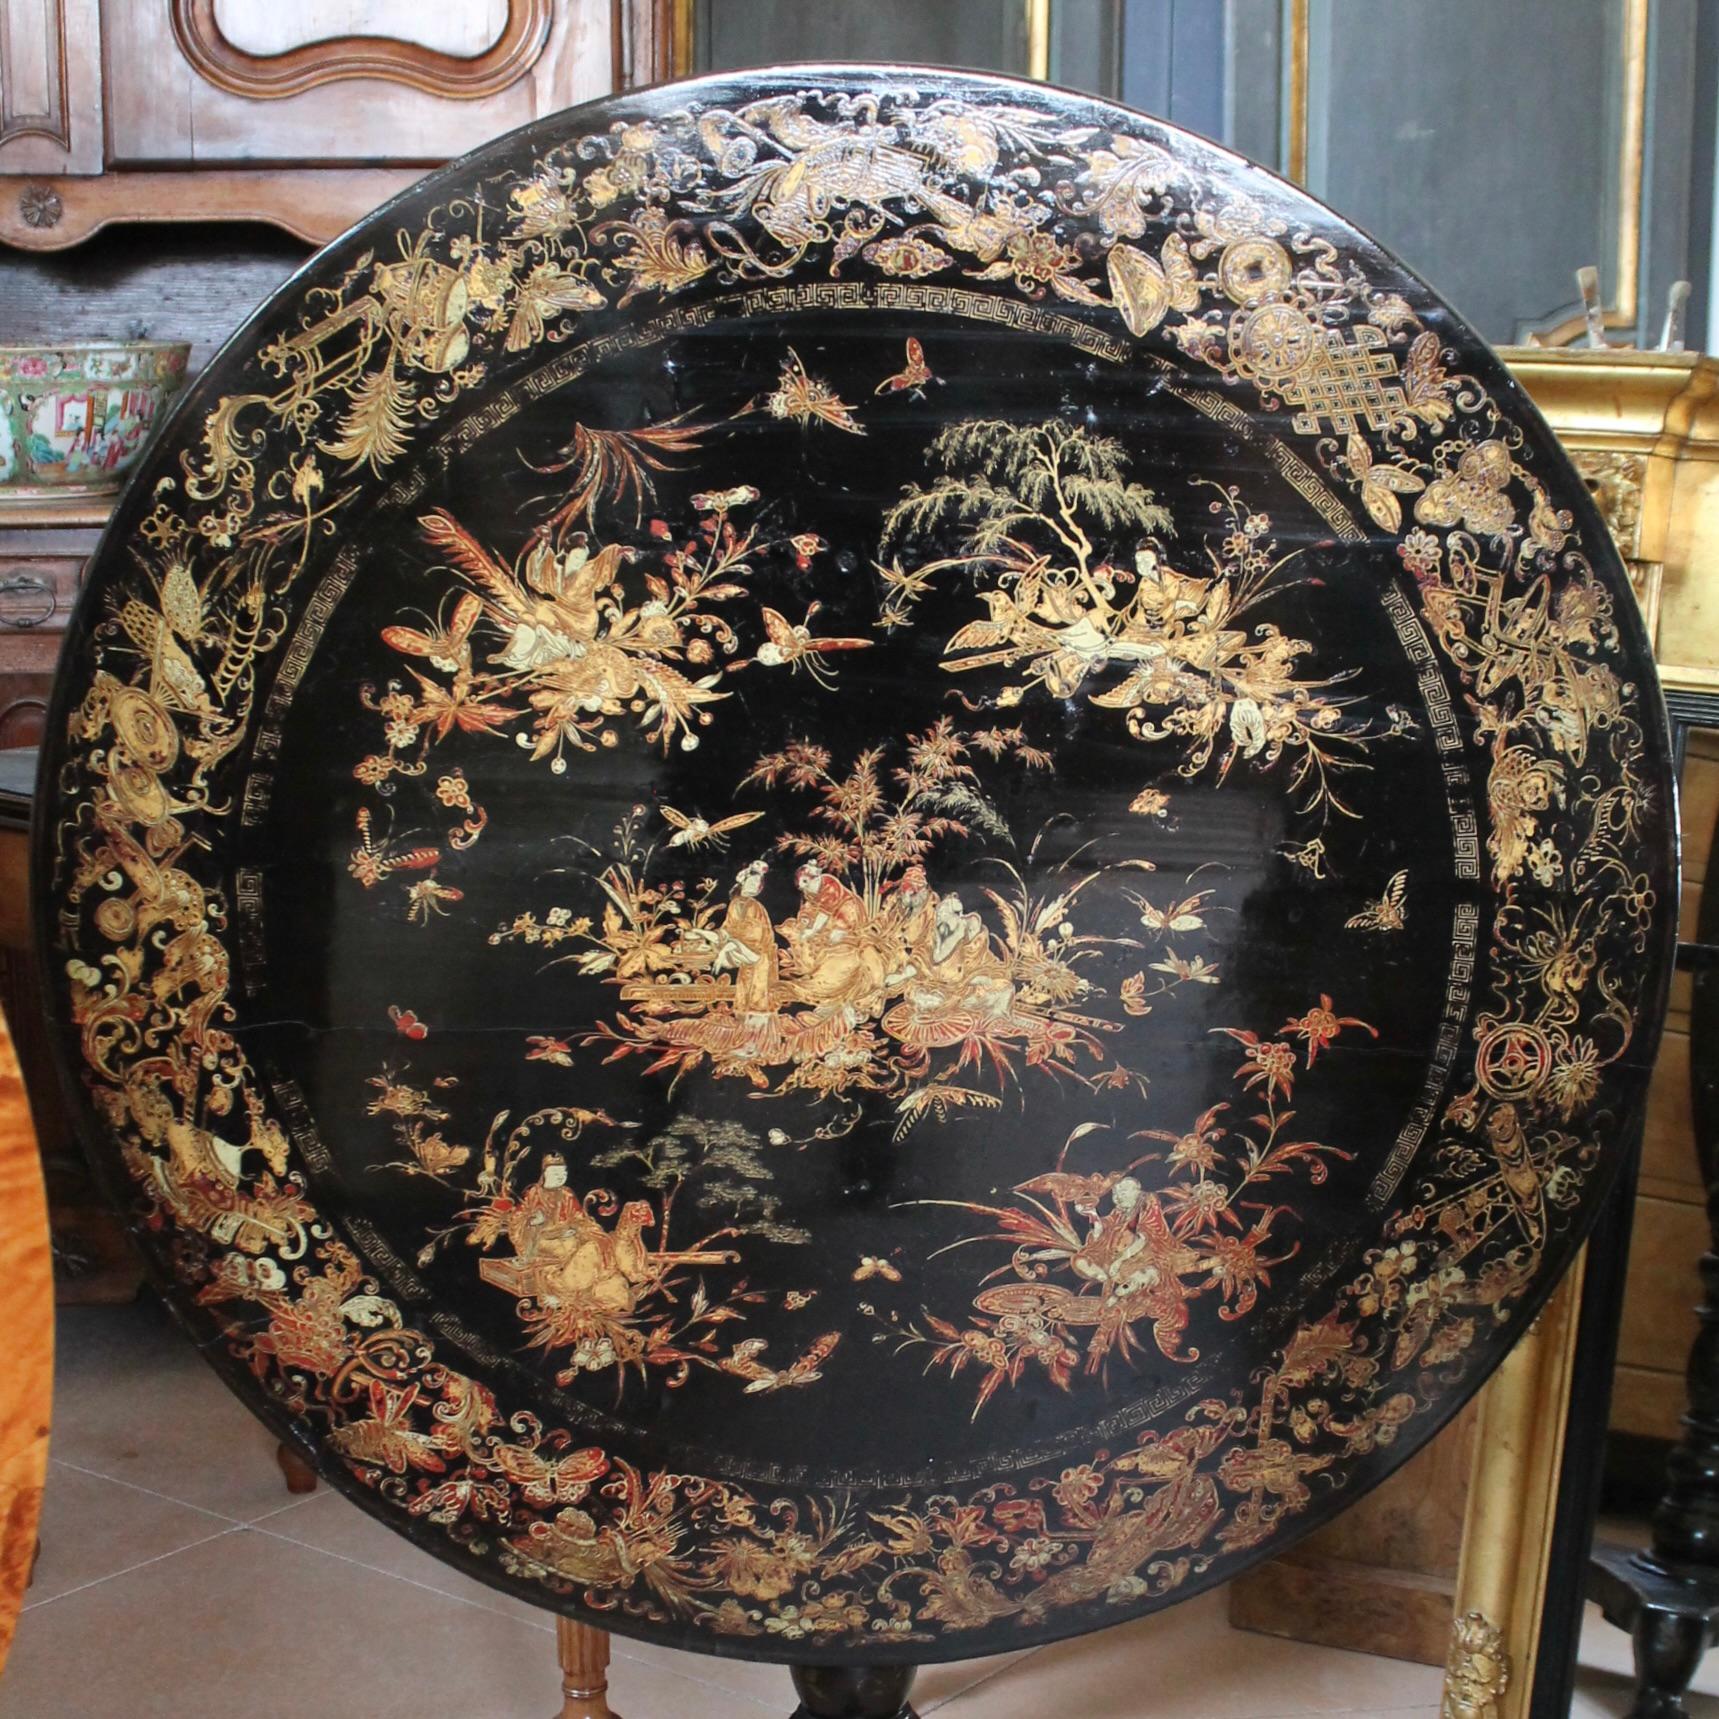 A fine early Chinese lacquer tilt top table decorated with stunning painted and gilded vignettes. There are all manner of elegantly executed sacred objects and musical instruments arrayed in the border around the top, in Chinese red with gilt